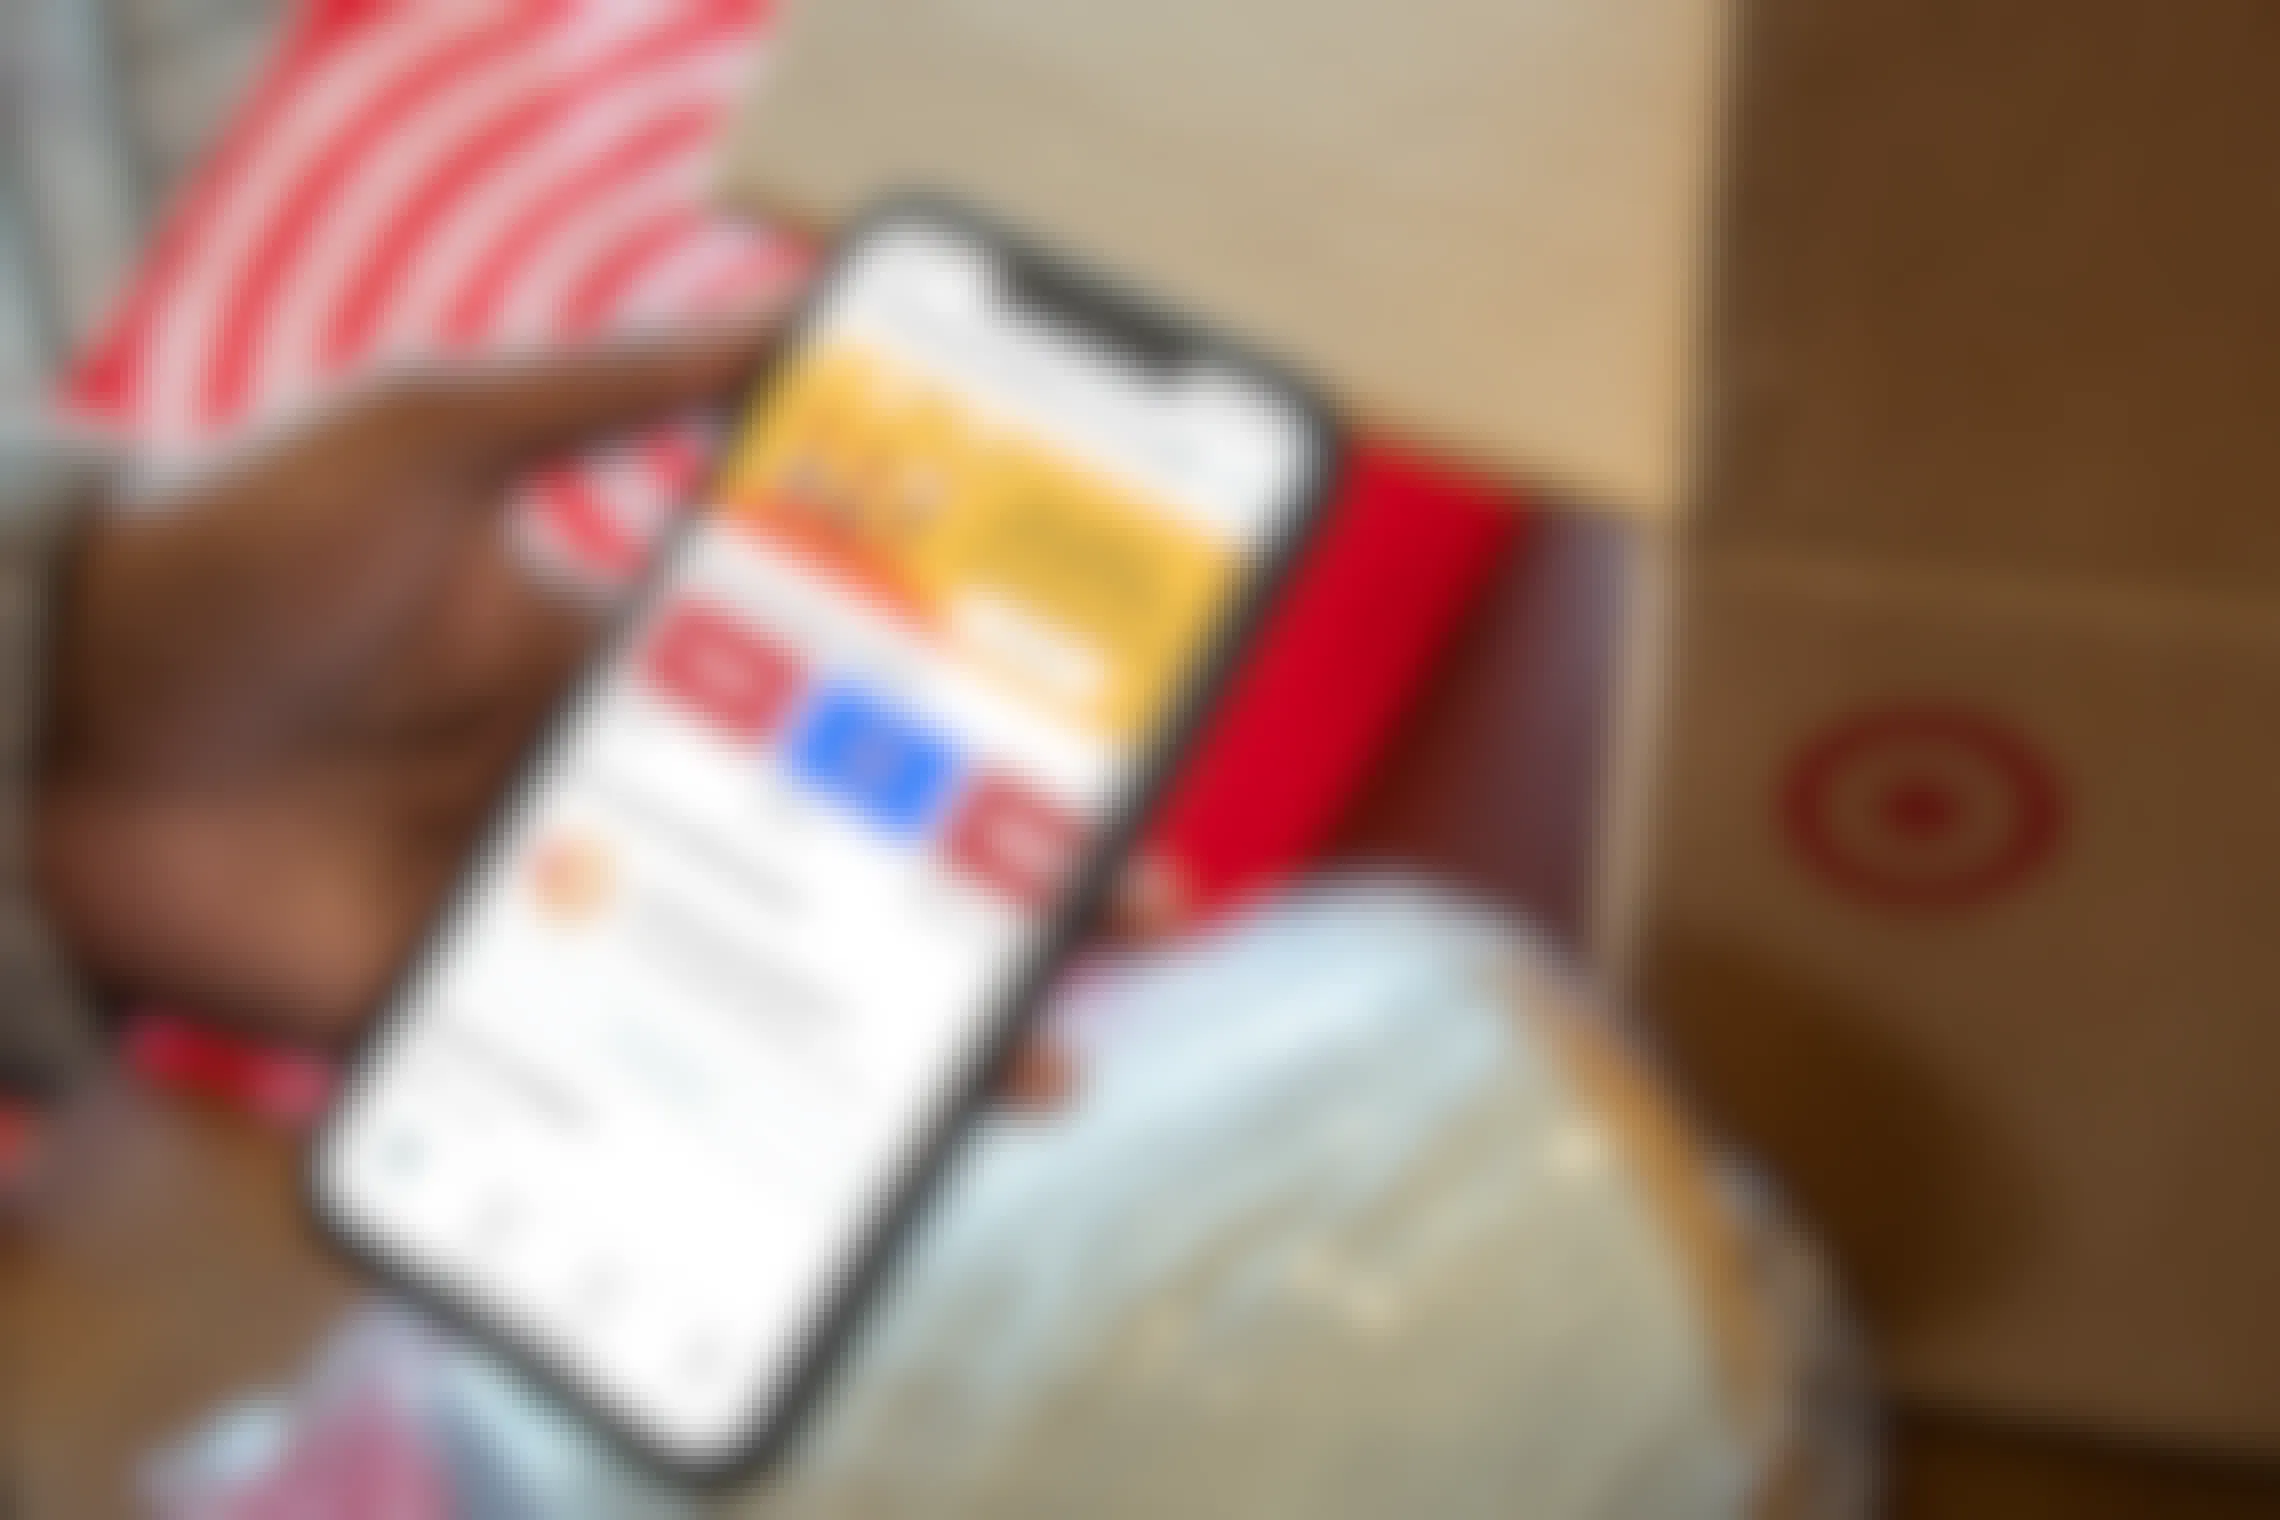 A person's hand holding an iPhone displaying the Ibotta app home page in front of a Target box.